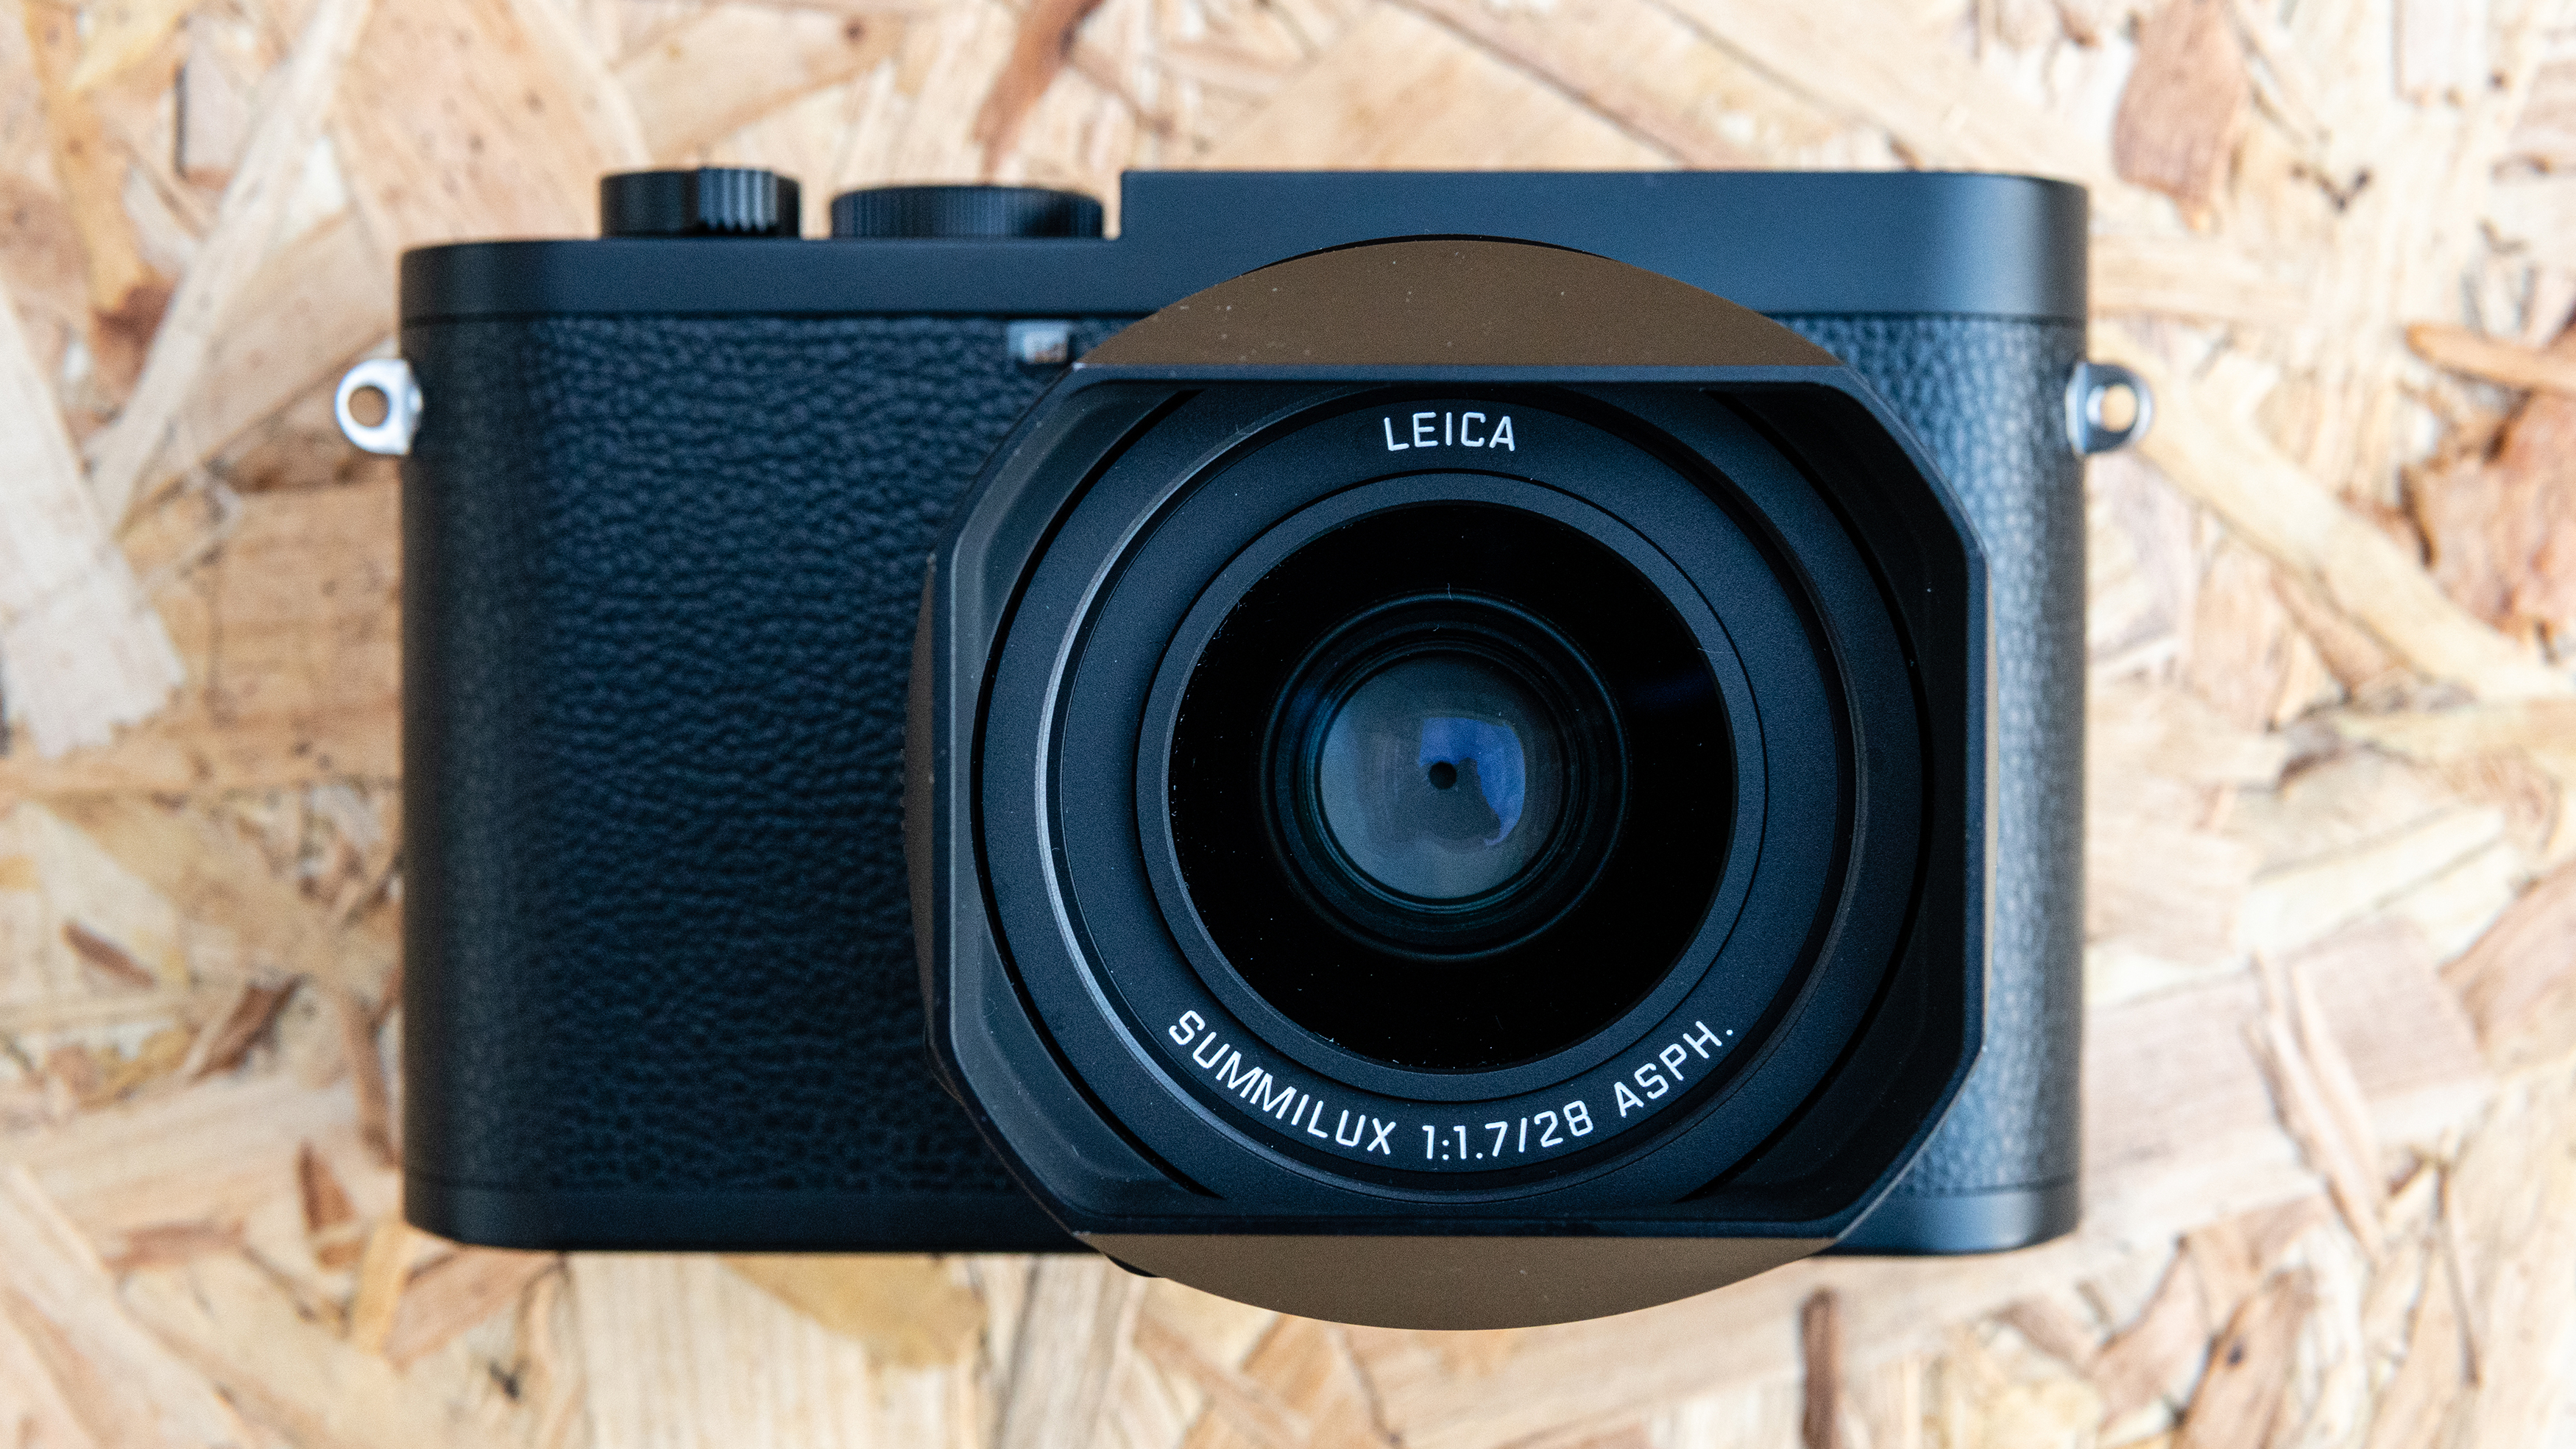 The Leica Q2 Monochrom resting on a woodchip panel